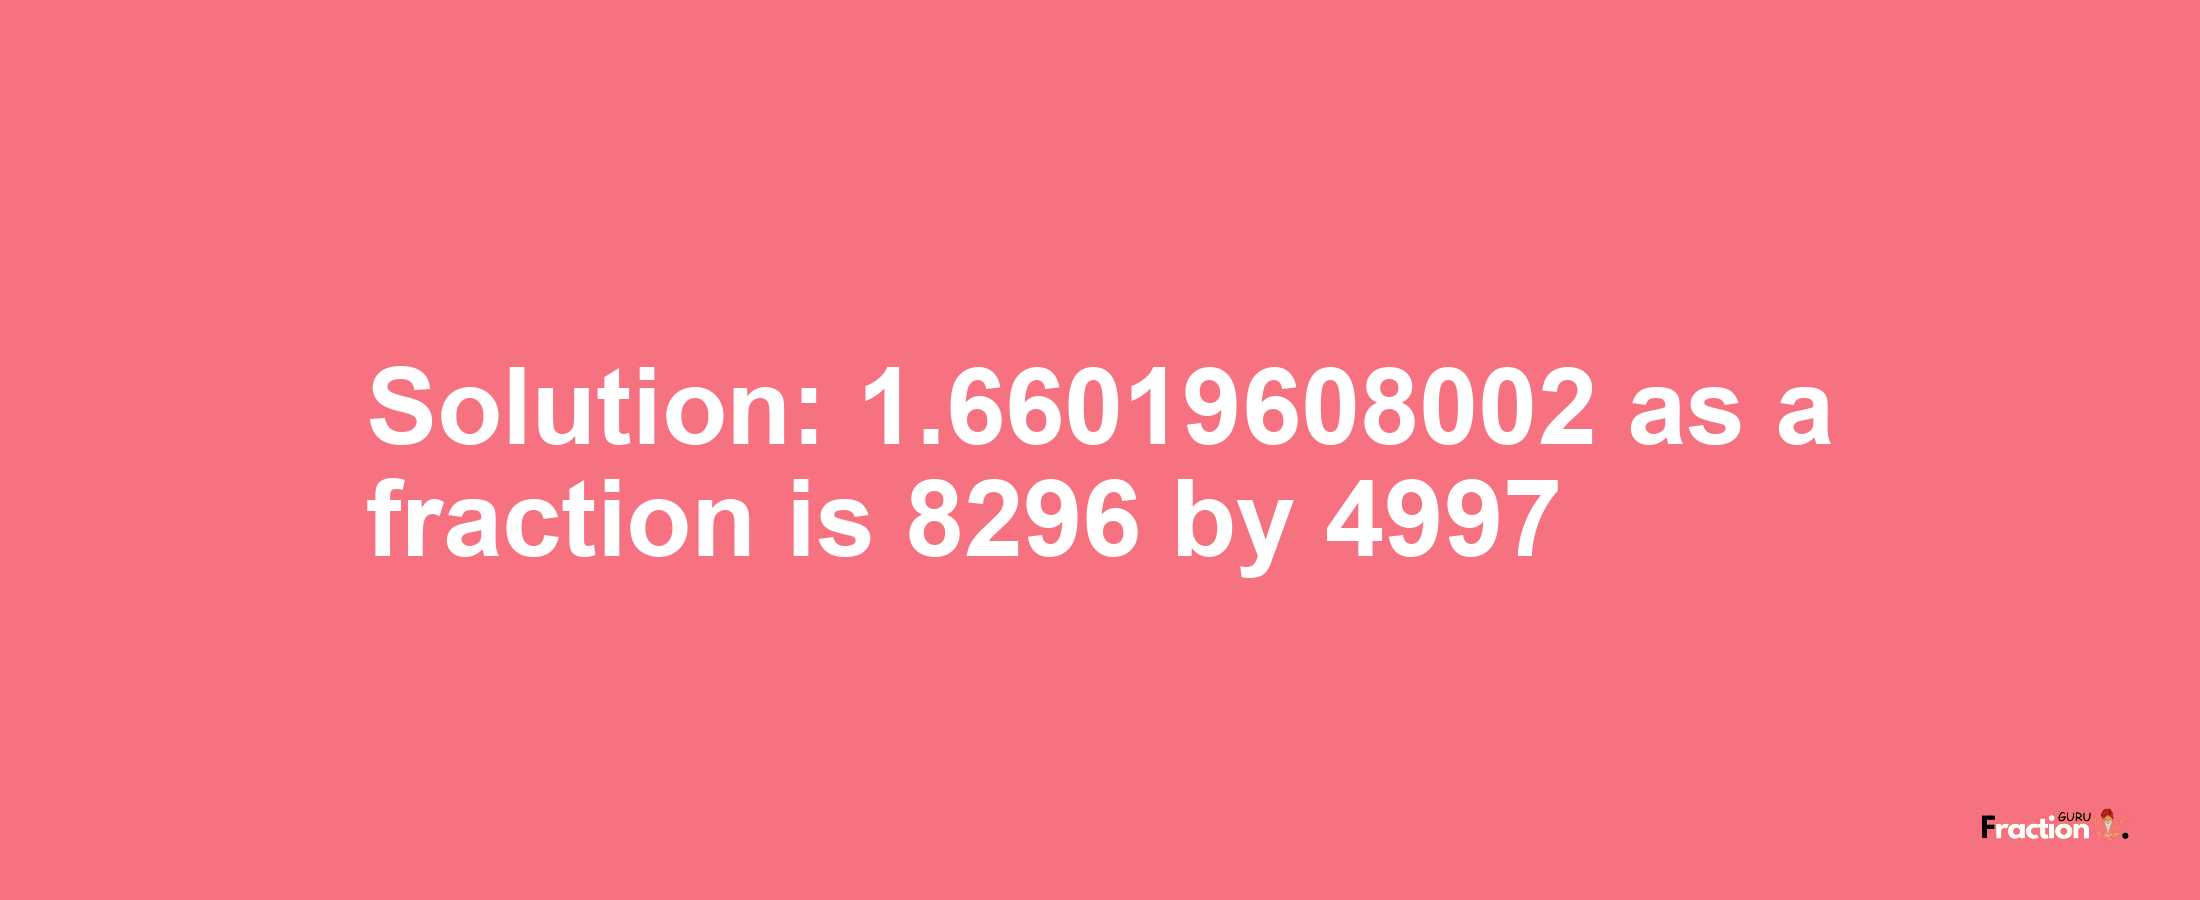 Solution:1.66019608002 as a fraction is 8296/4997